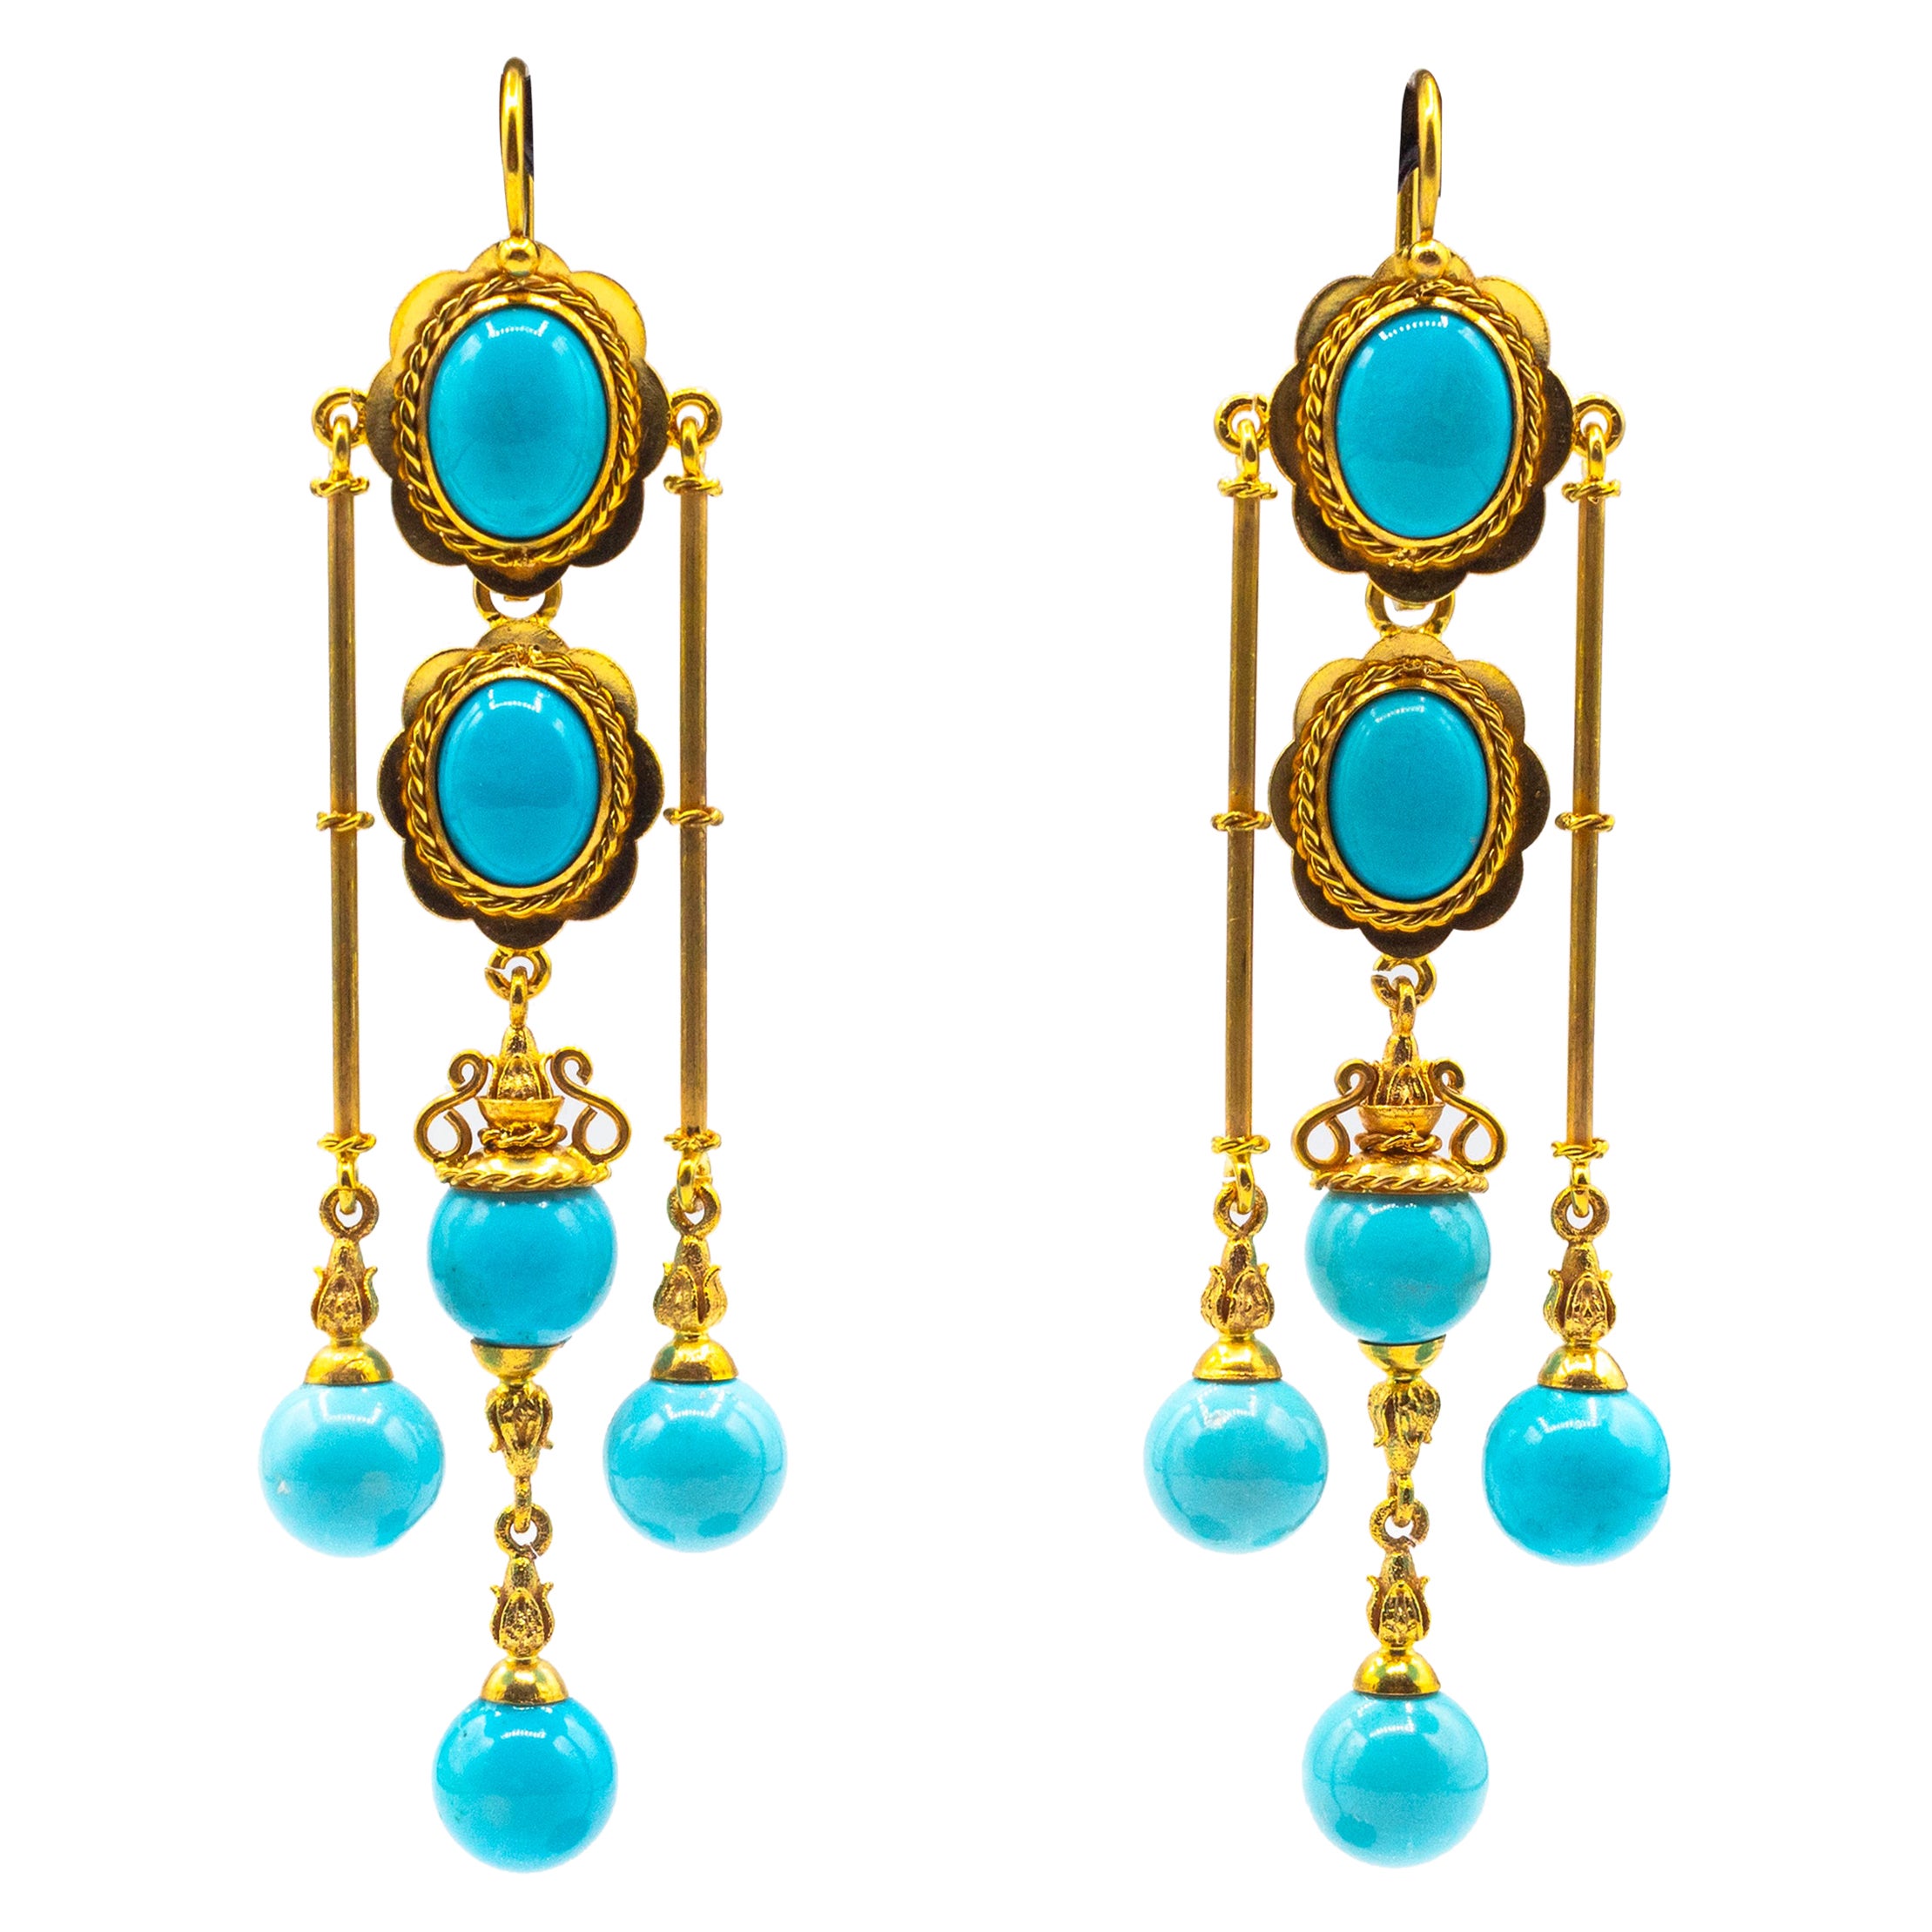 Art Deco Style Handcrafted Natural Turquoise Yellow Gold Drop Earrings